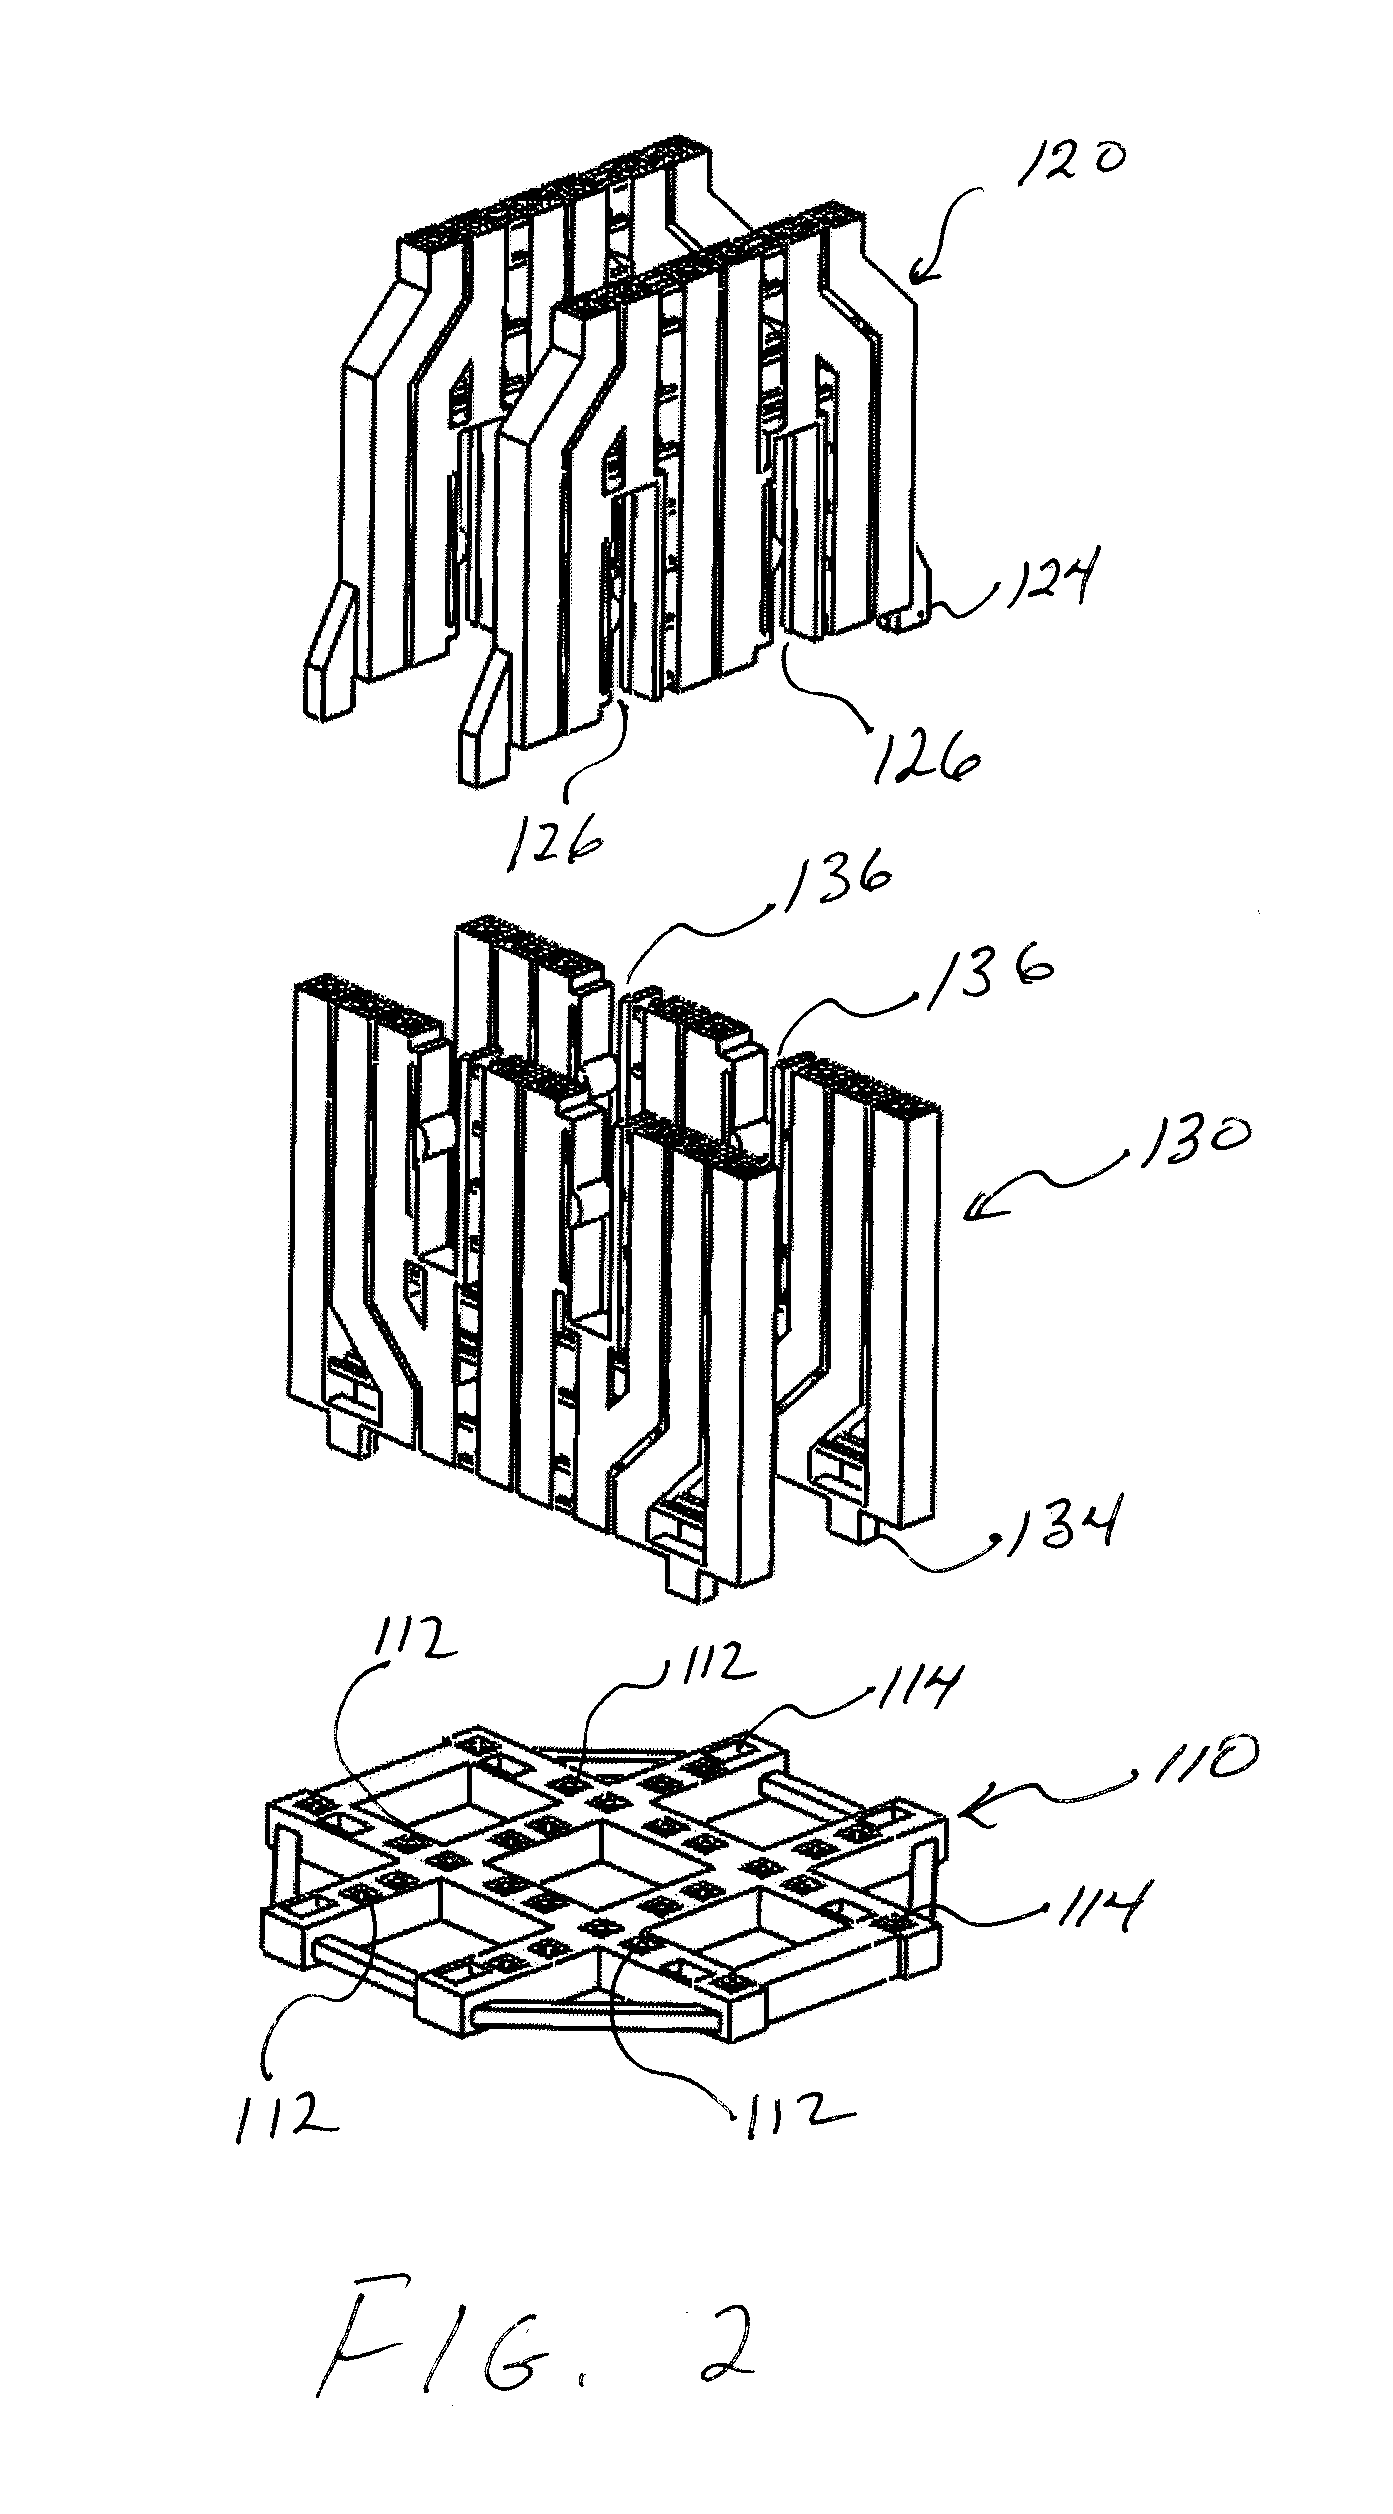 Substrate-free interconnected electronic mechanical structural systems